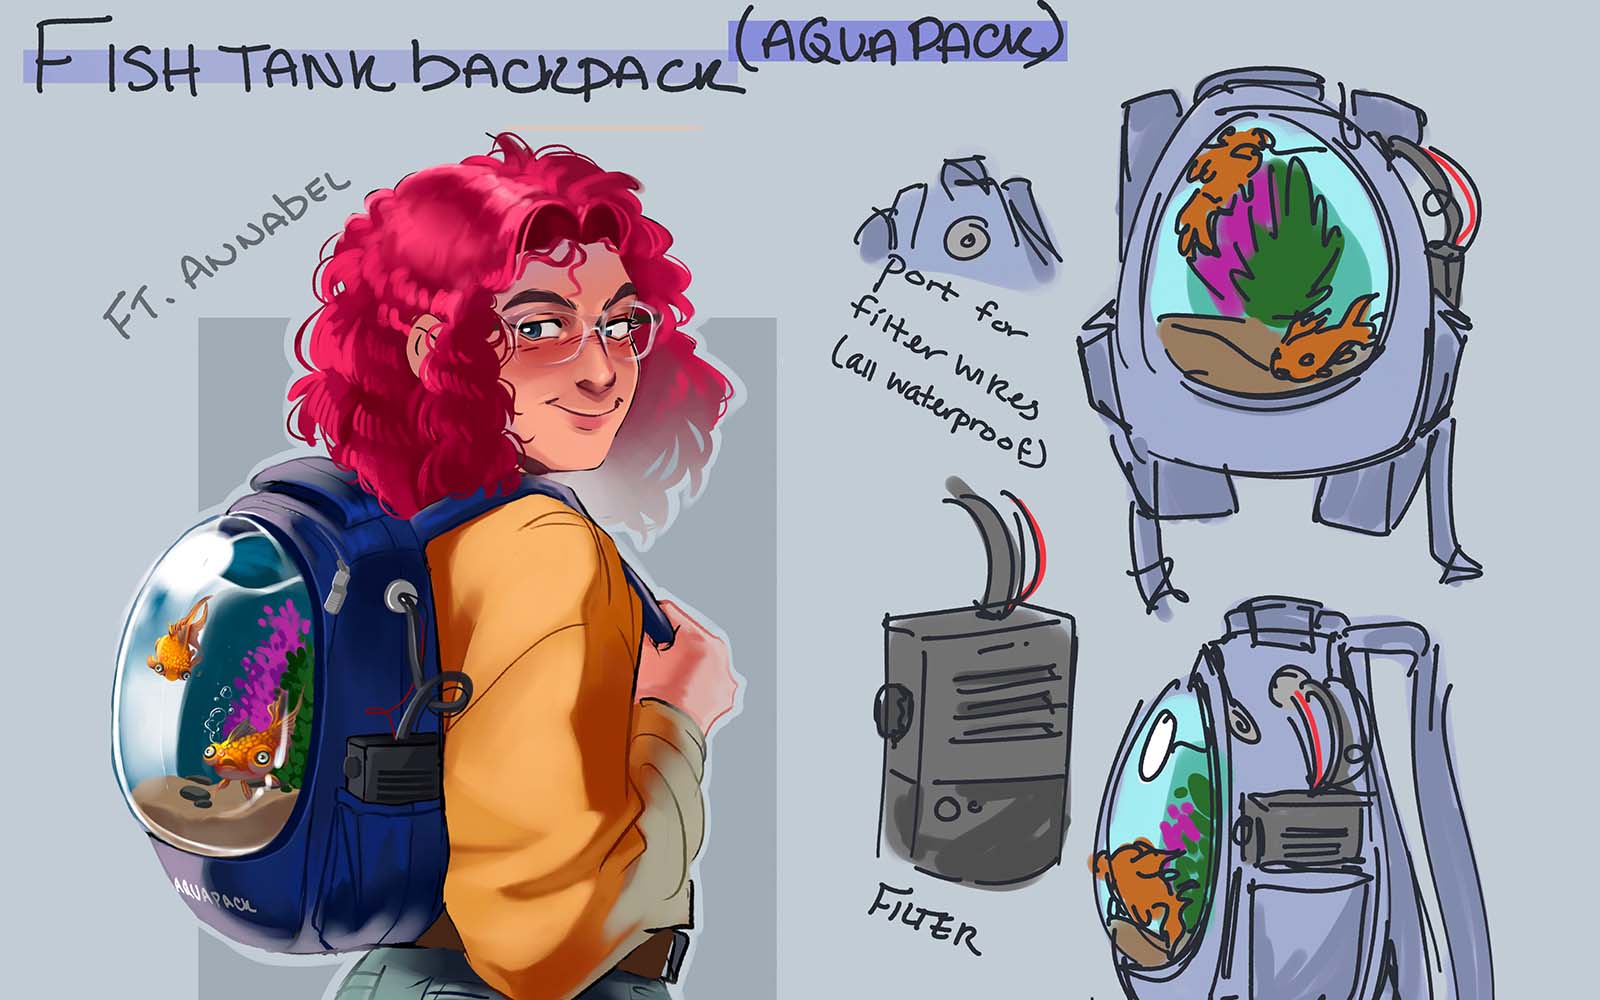 Product sketch of a fishtank backpack.